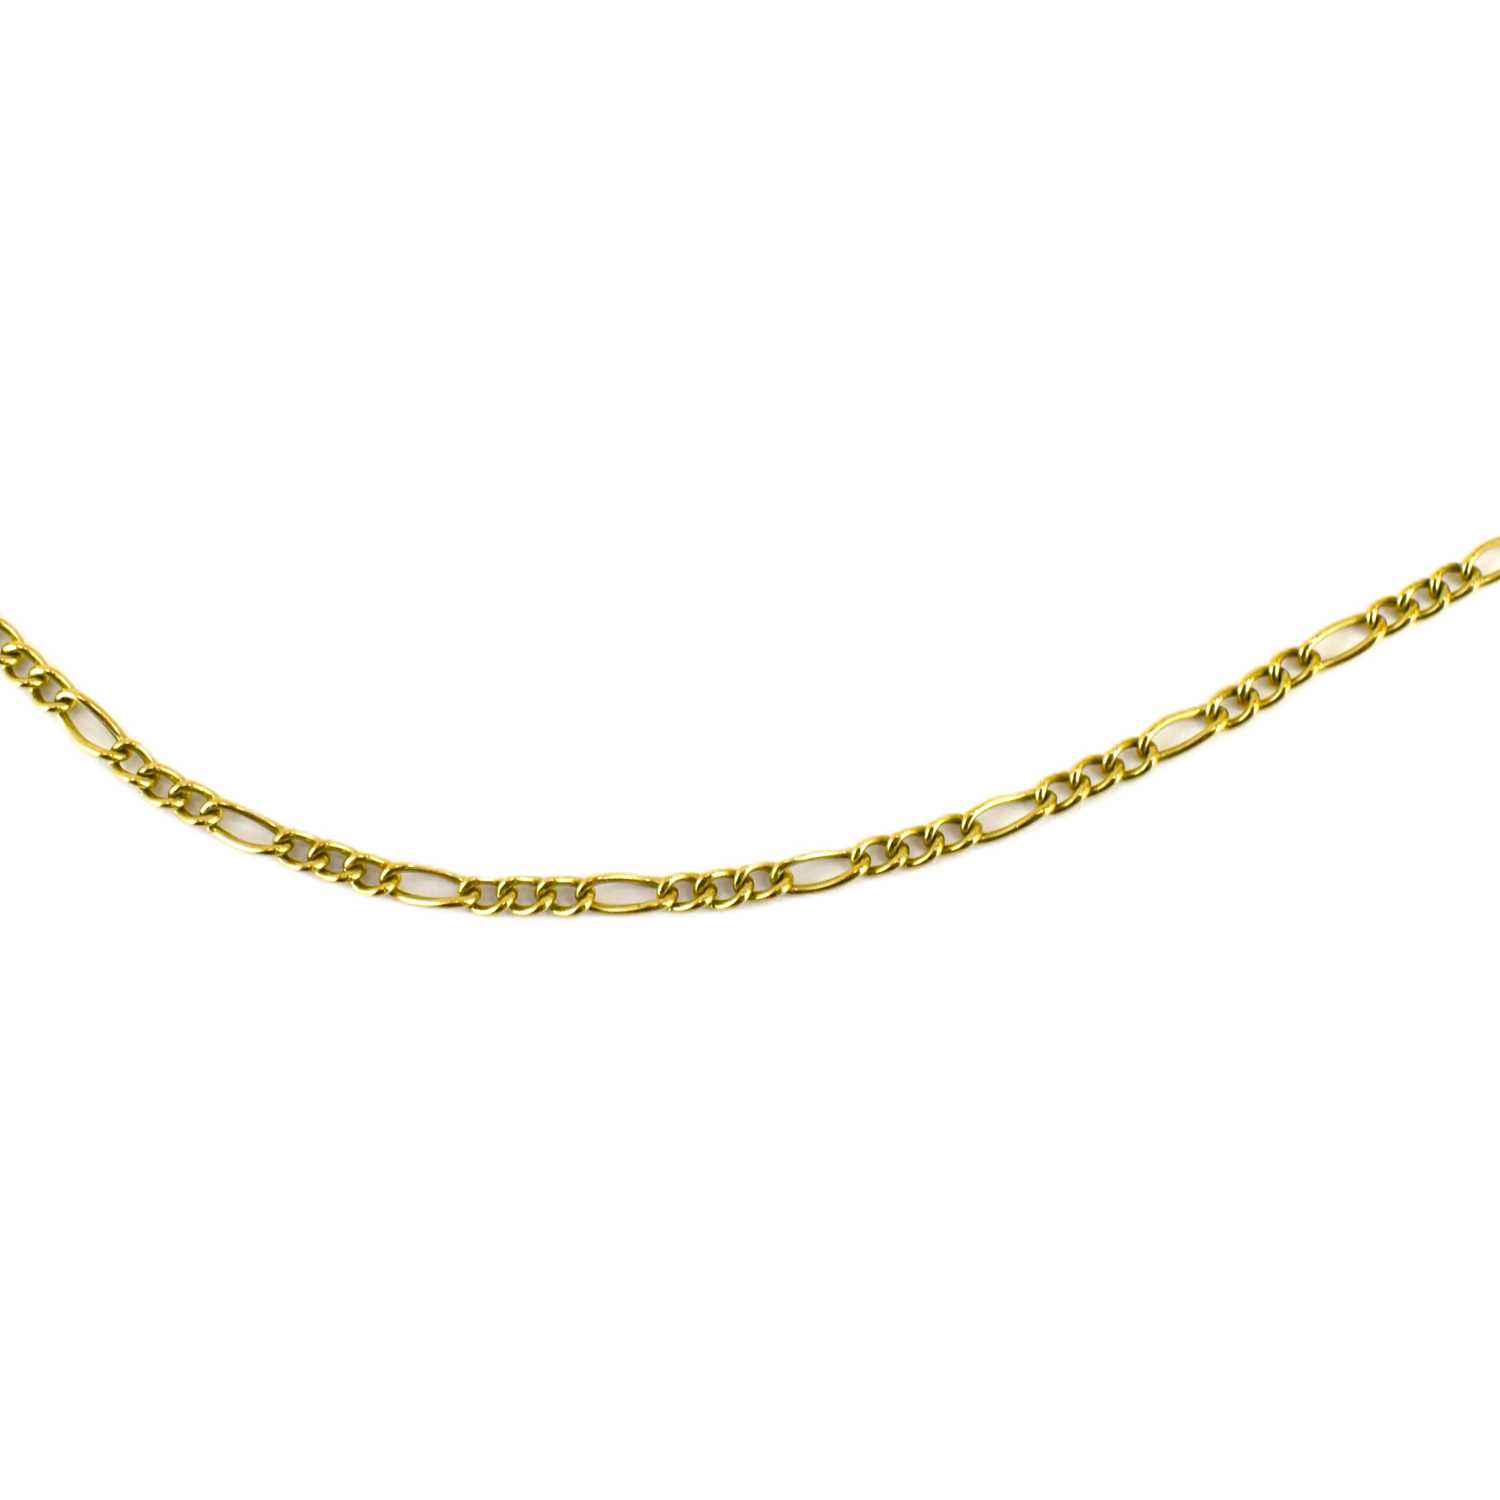 A 9ct gold Figaro link necklace with lobster claw clasp, length 44cm, approx. 2.4g.